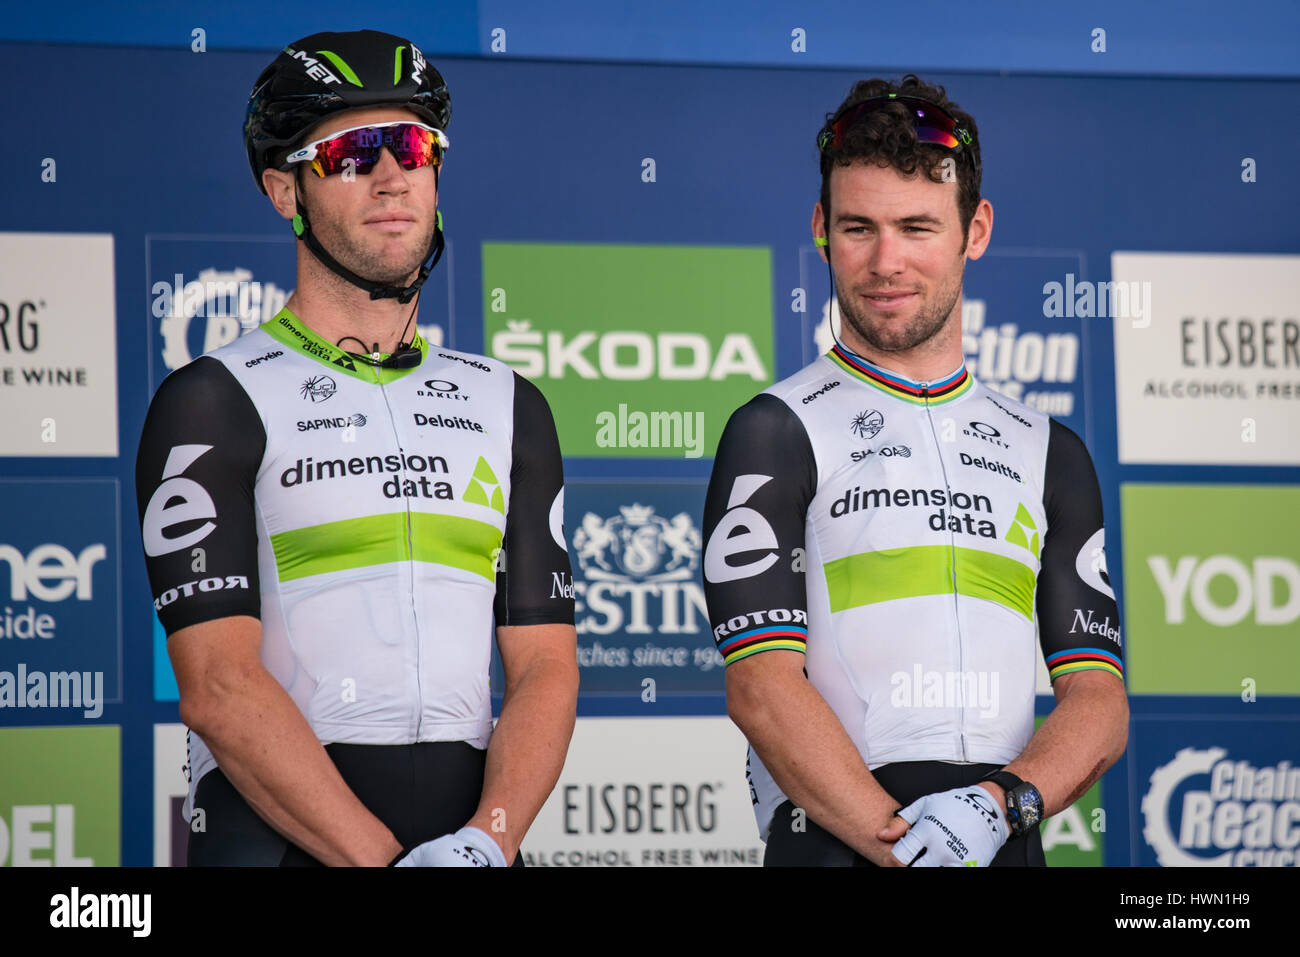 Mark Cavendish and Mark Renshaw of Team Dimension Data at the start of stage 4 of the 2016 Tour of Britain in Denbigh, Wales Stock Photo